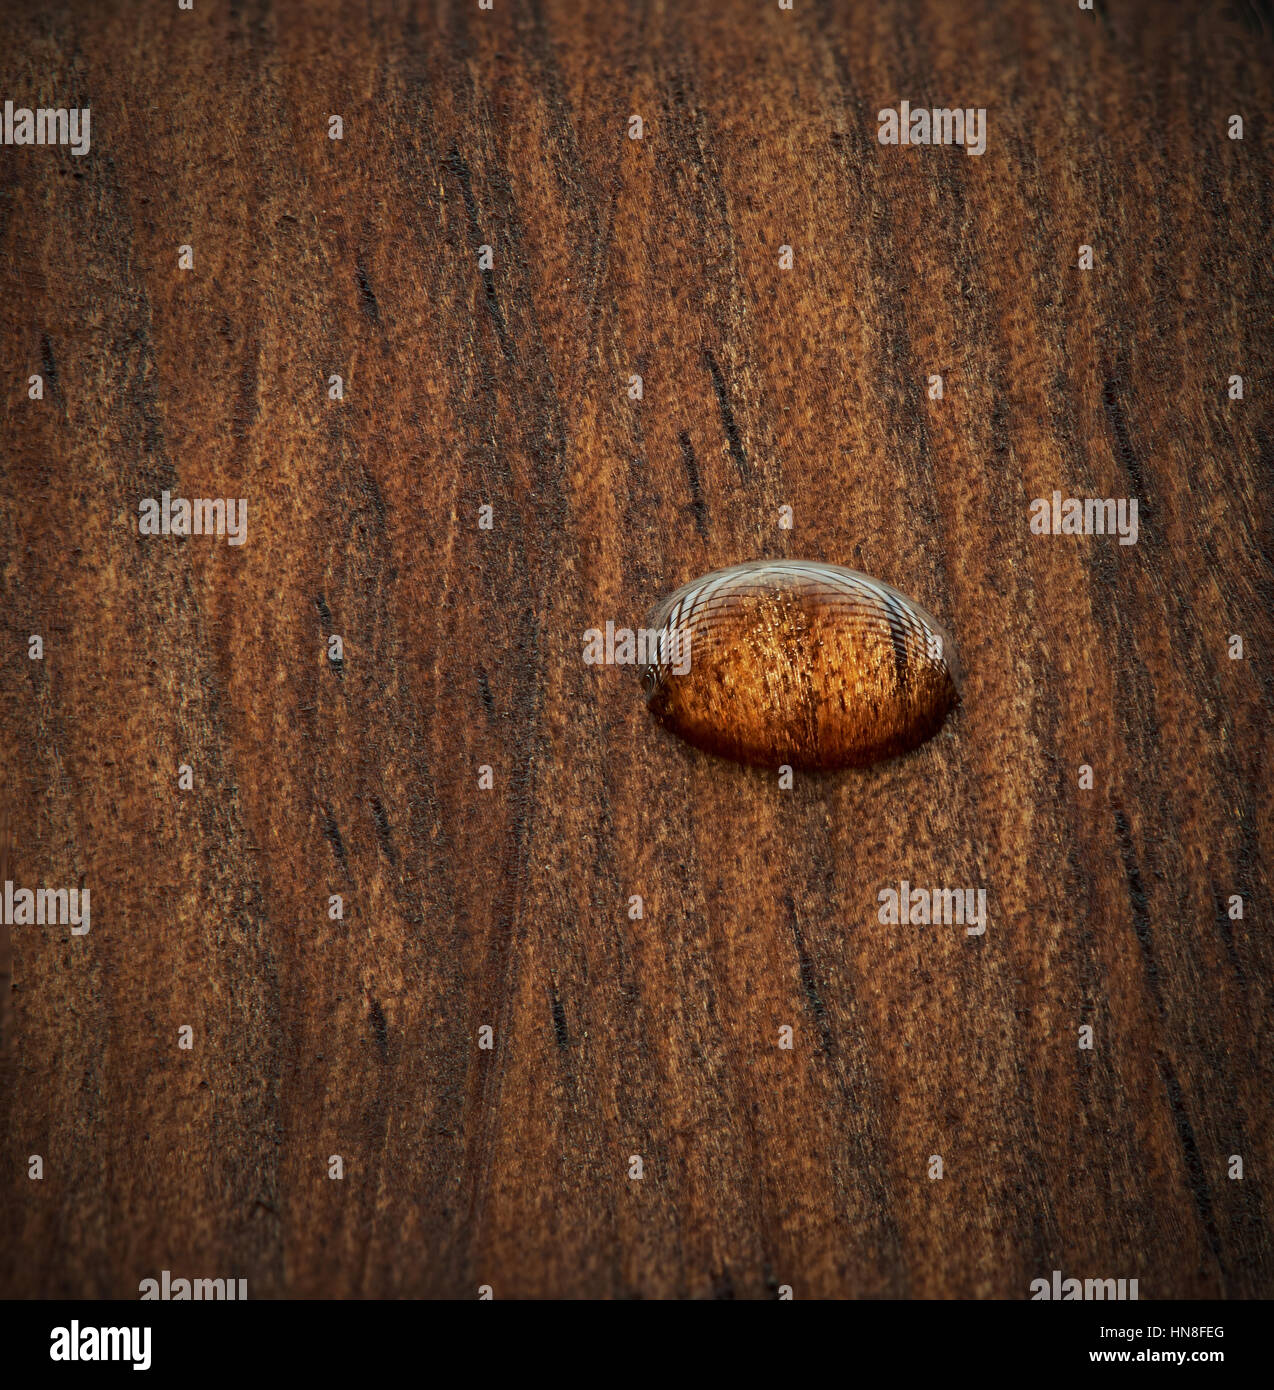 one water drop on dark wood surface Stock Photo